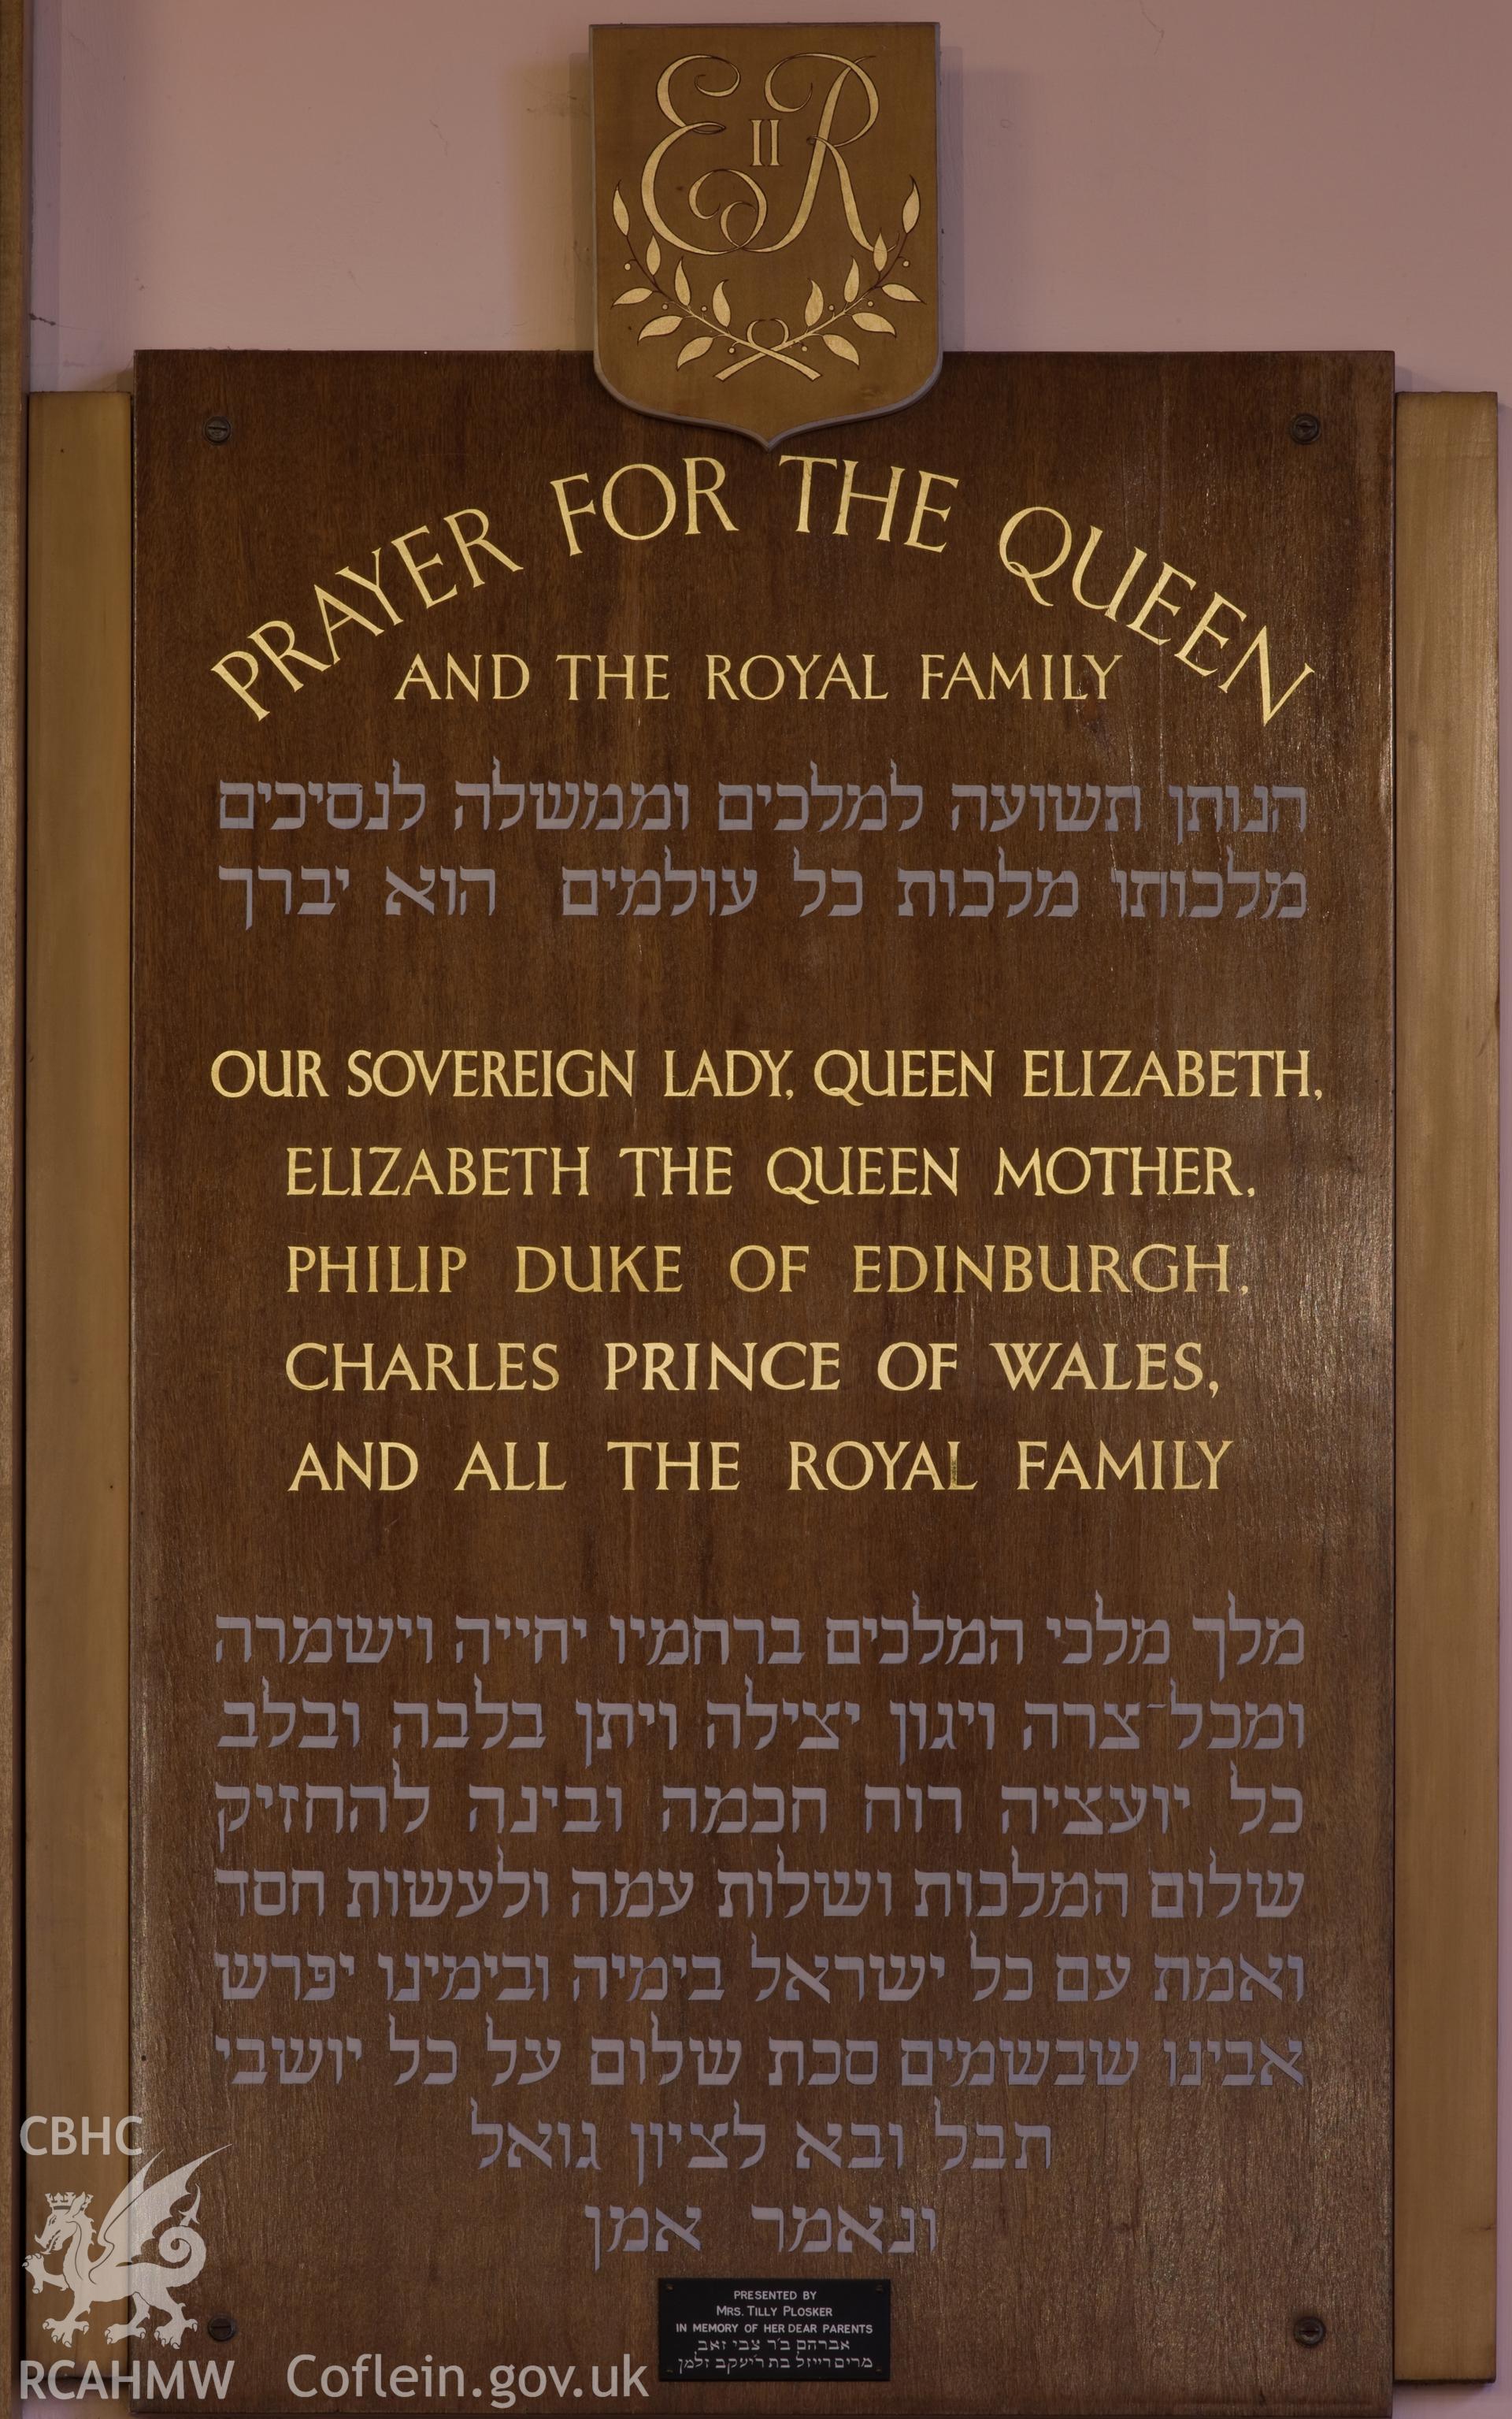 Prayer for the Queen.